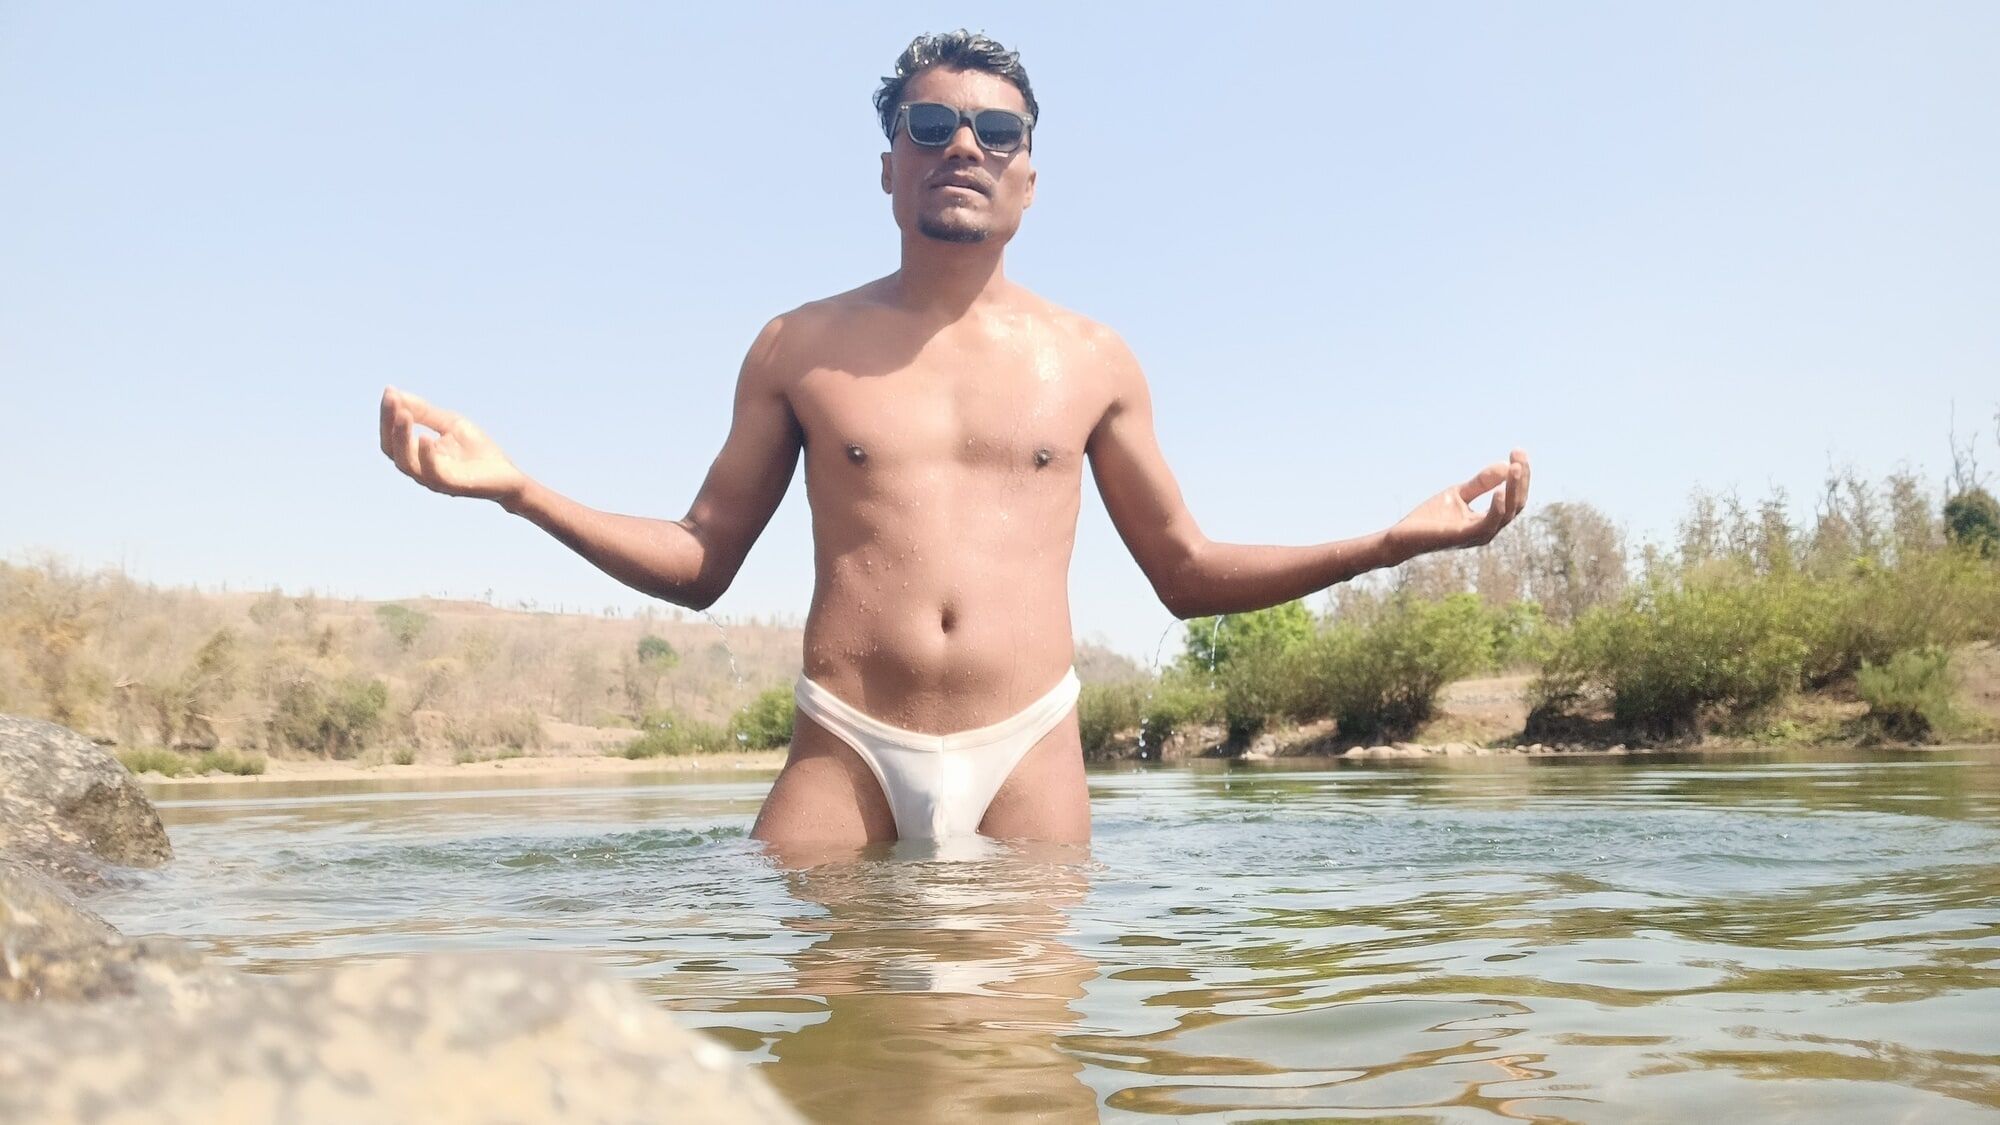 Sanju gamit on river advanture hot and sexy looking in man  #44